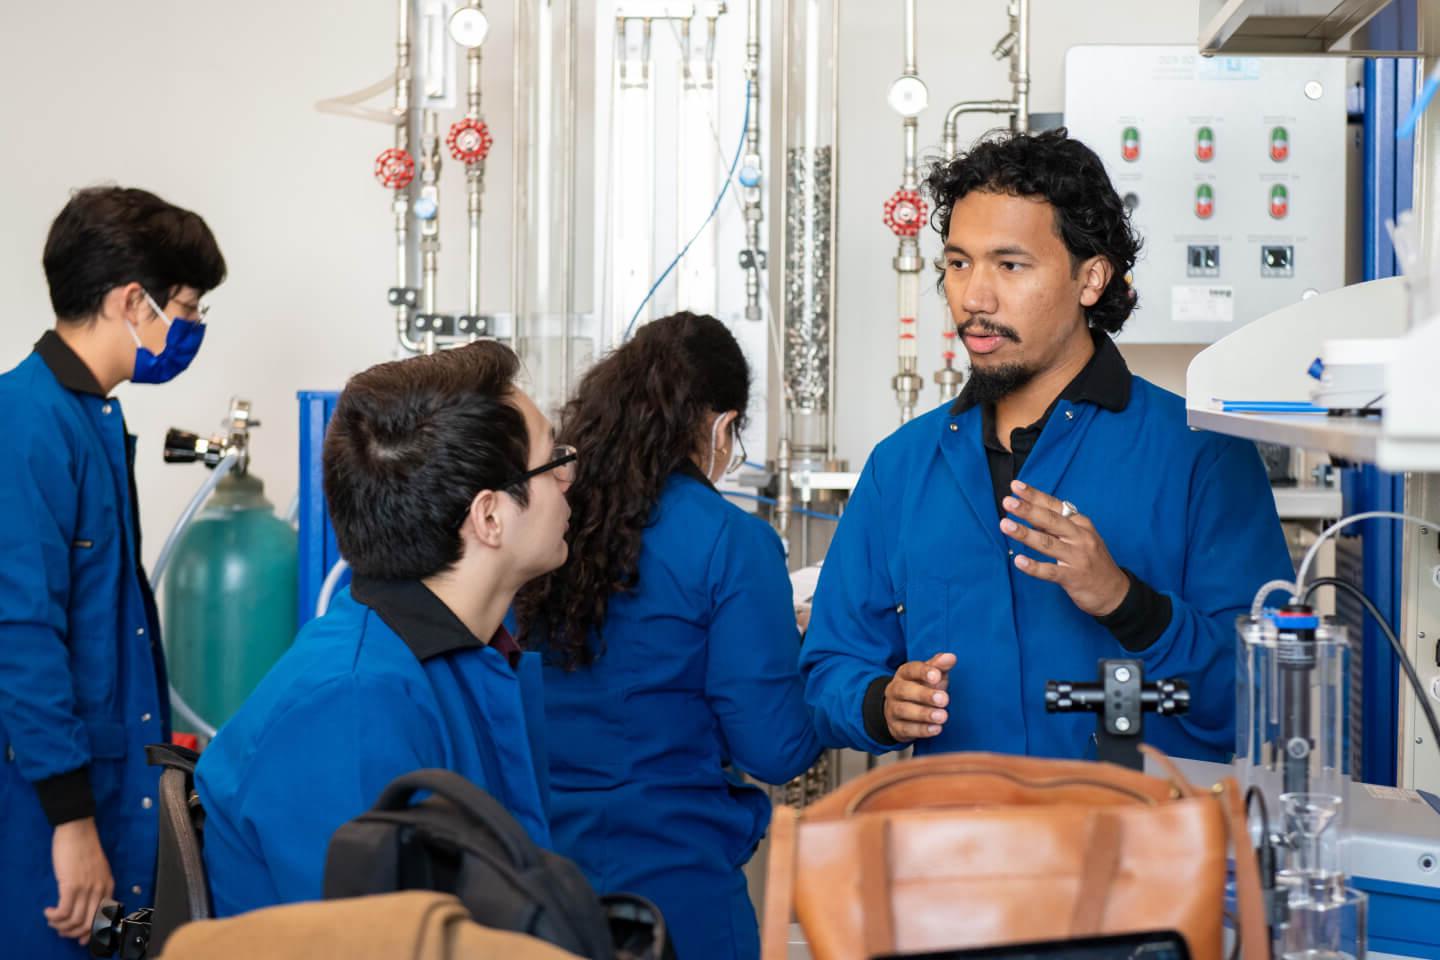 Students and professor inside a lab wearing blue coats